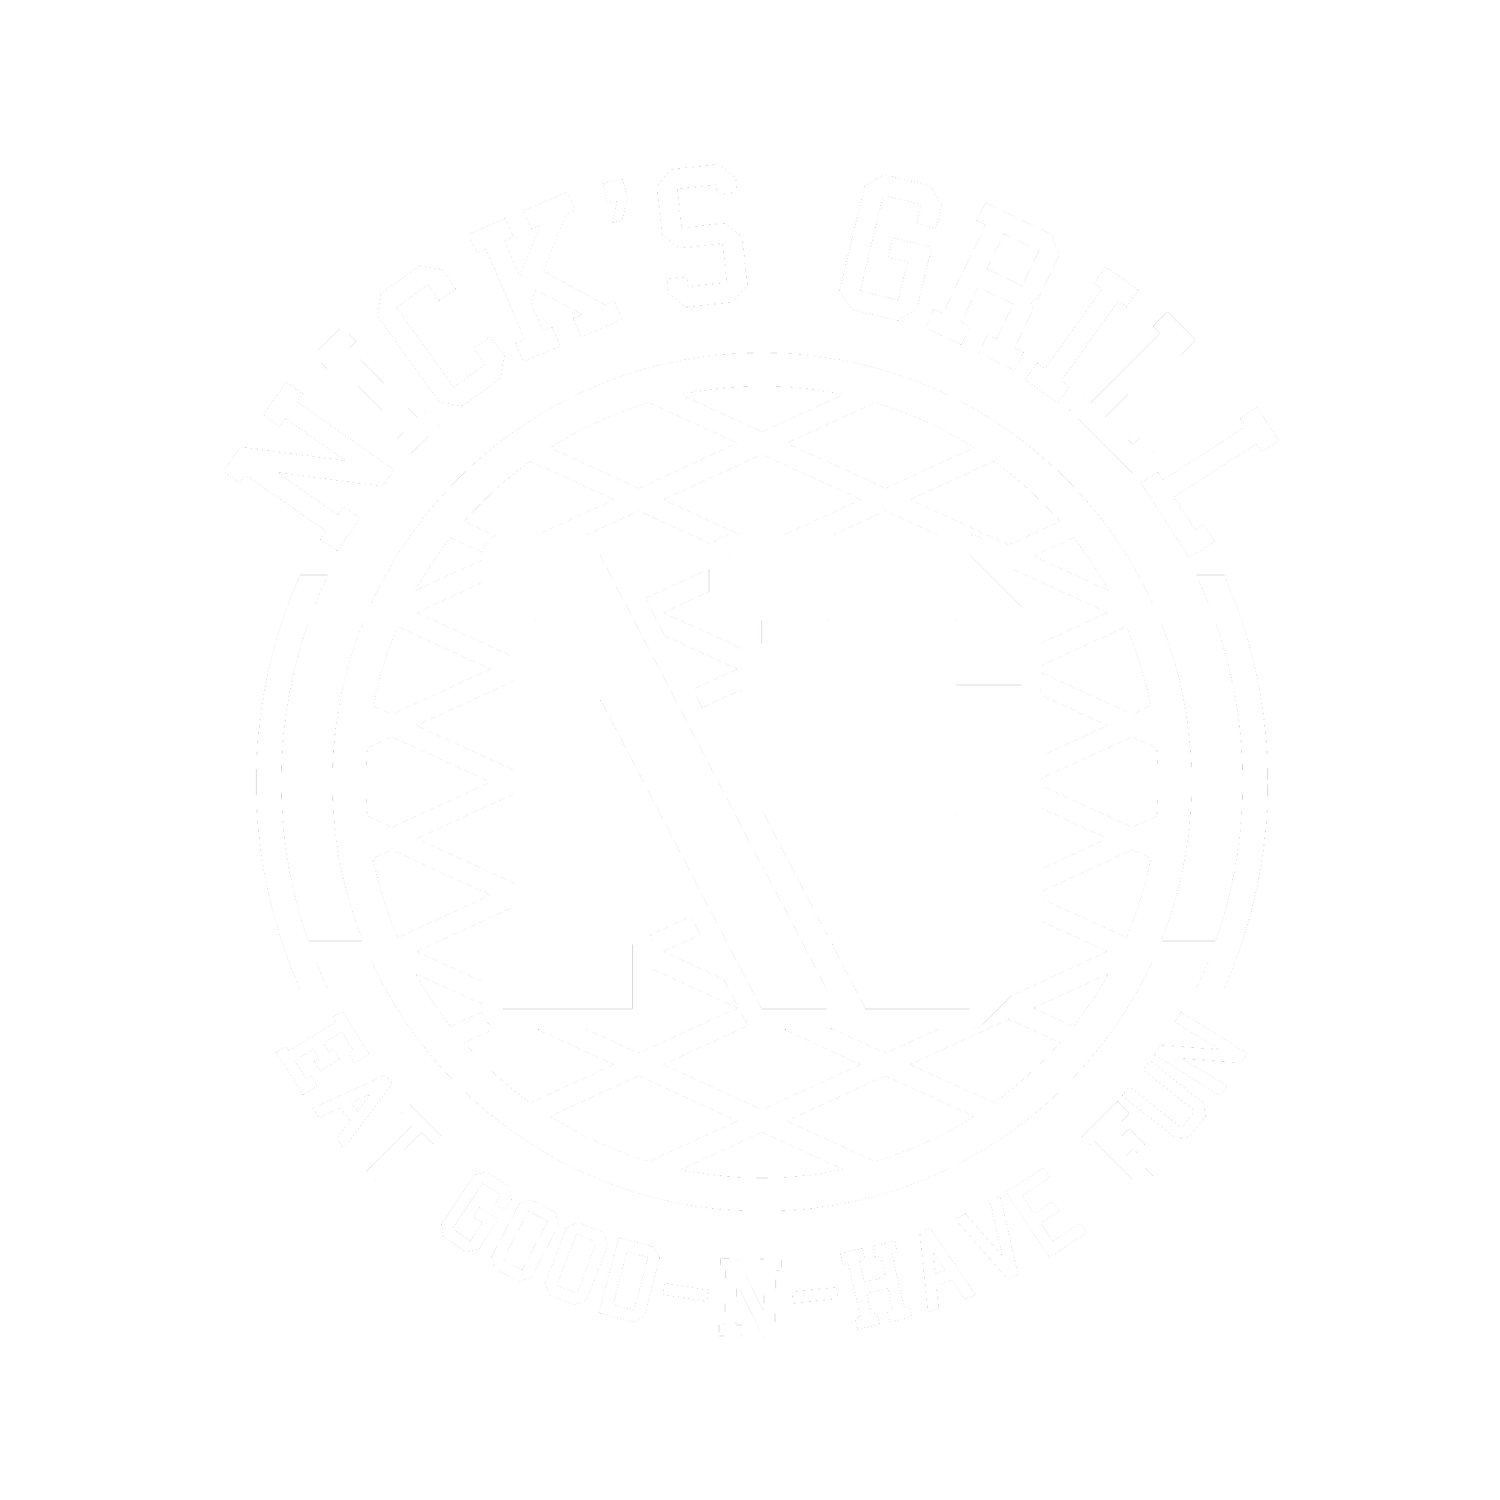 Nick's Grill